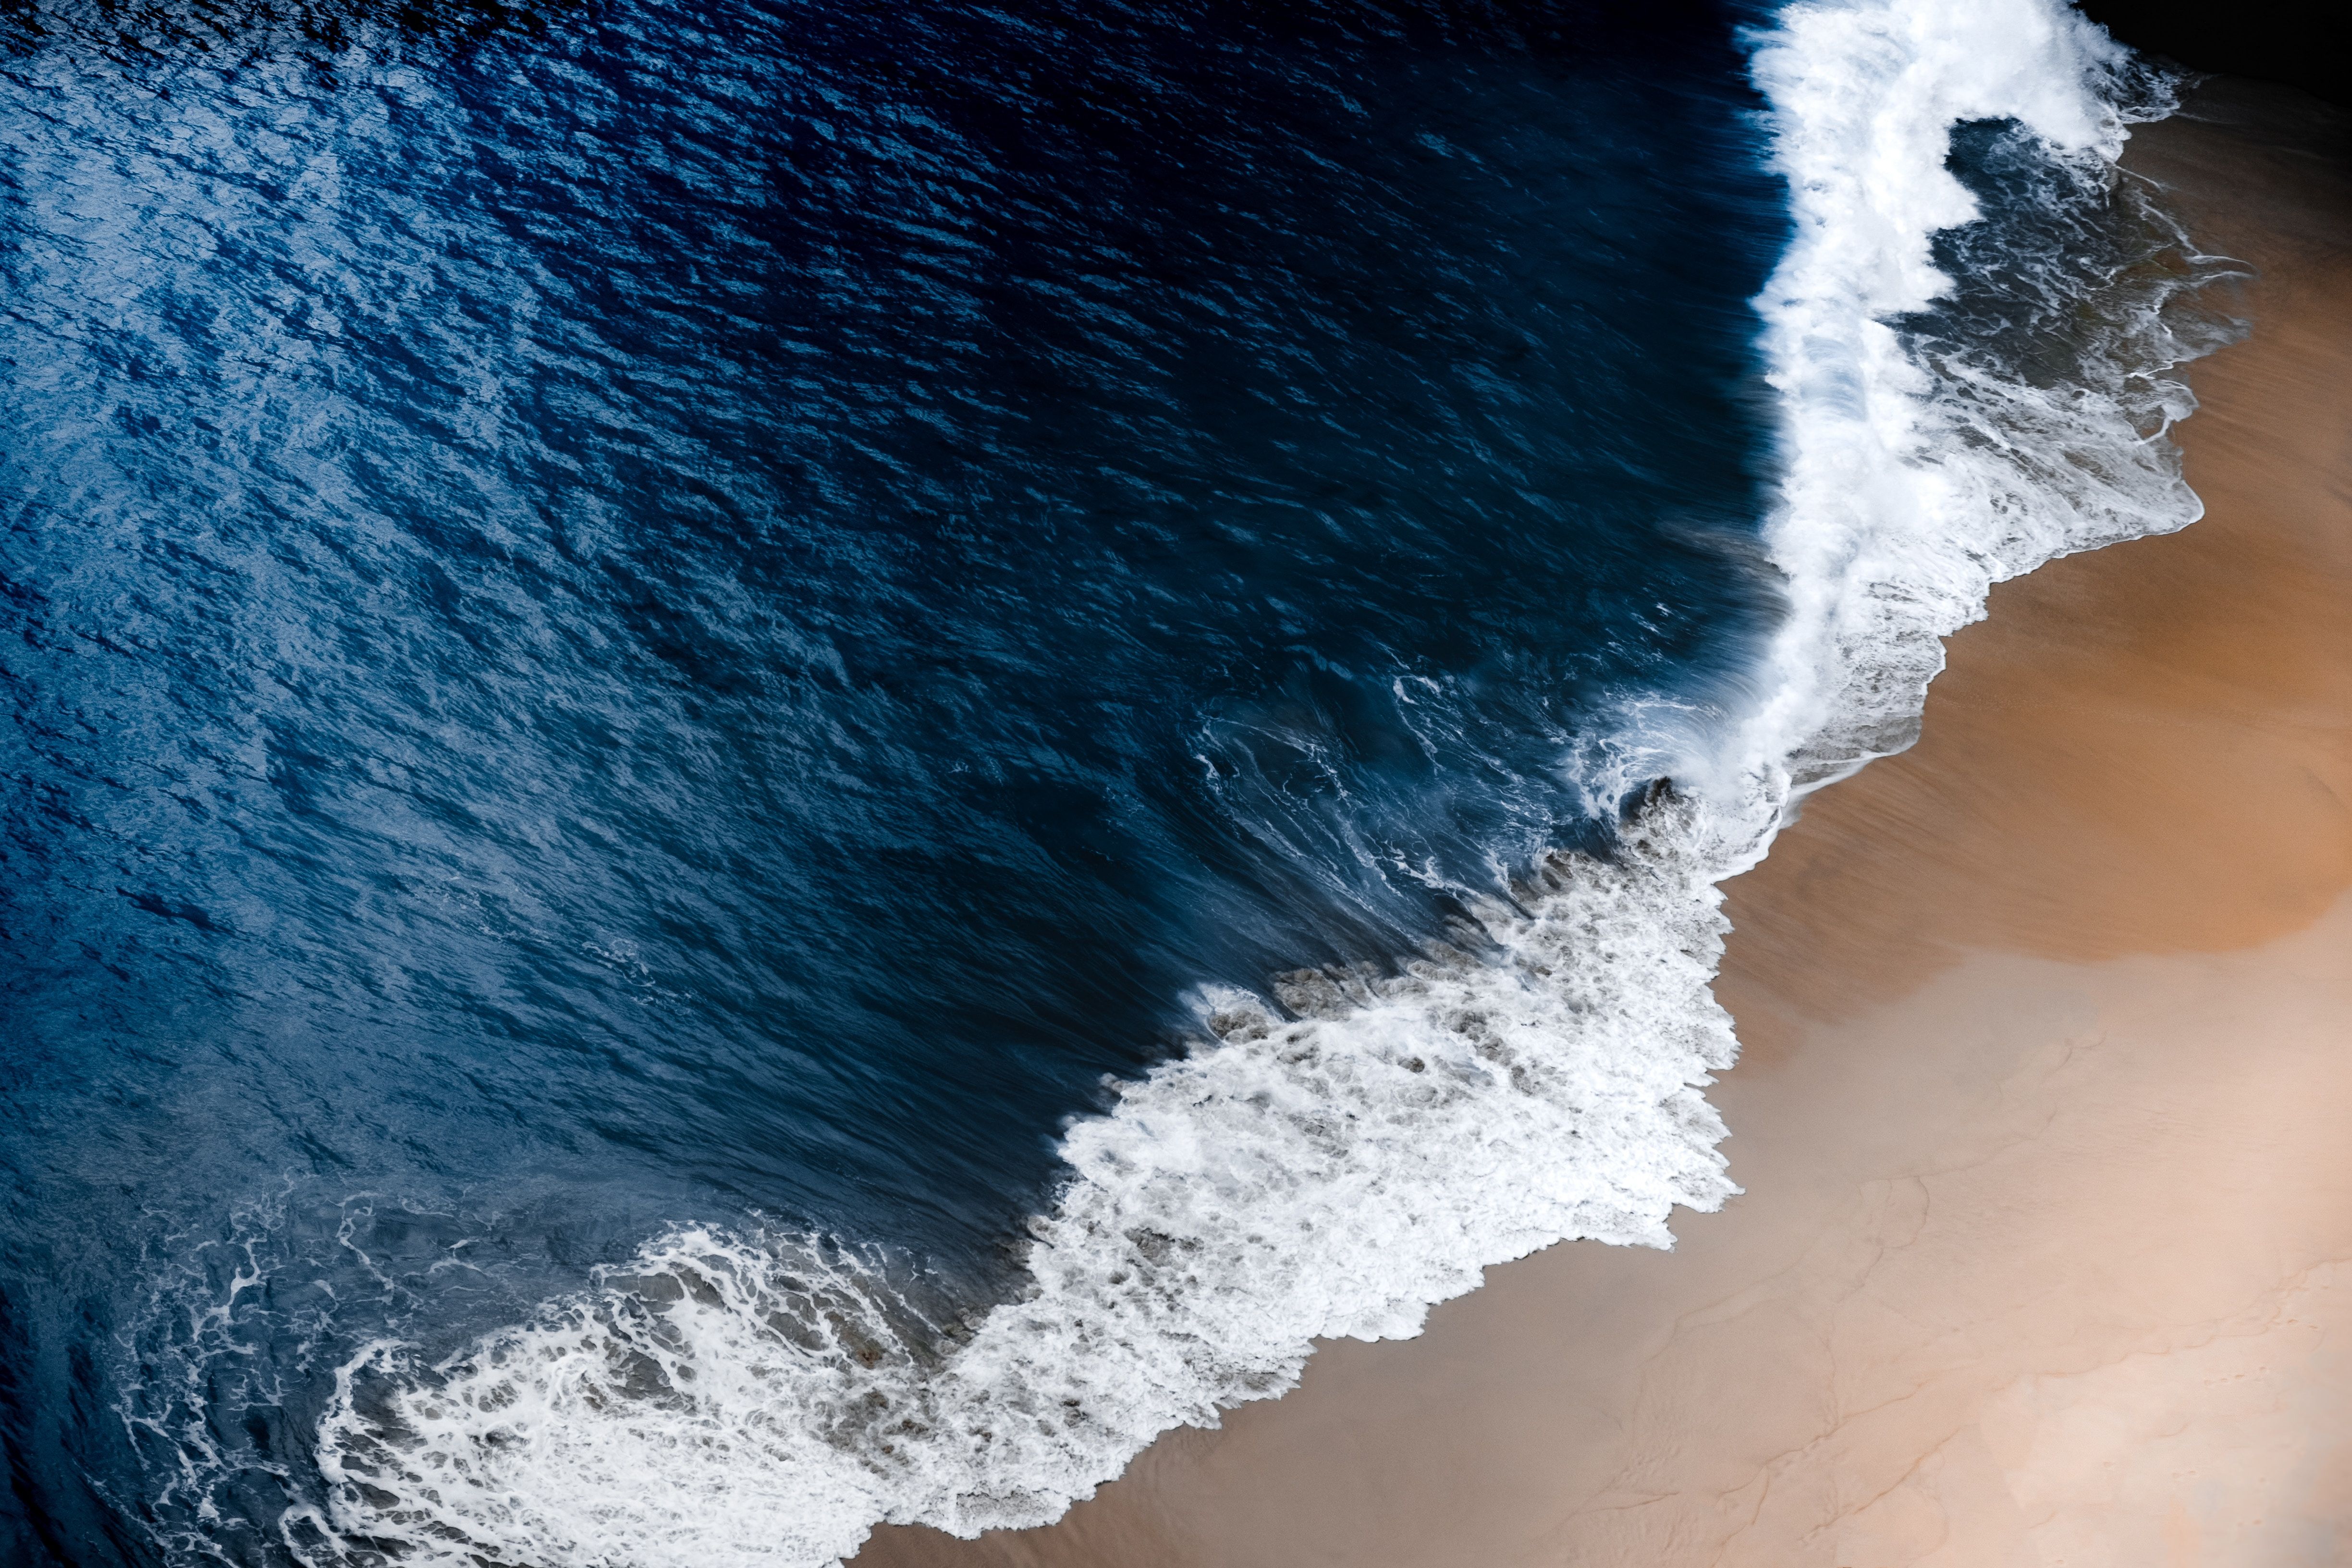 Aerial view of a wave crashing on a beach - Water